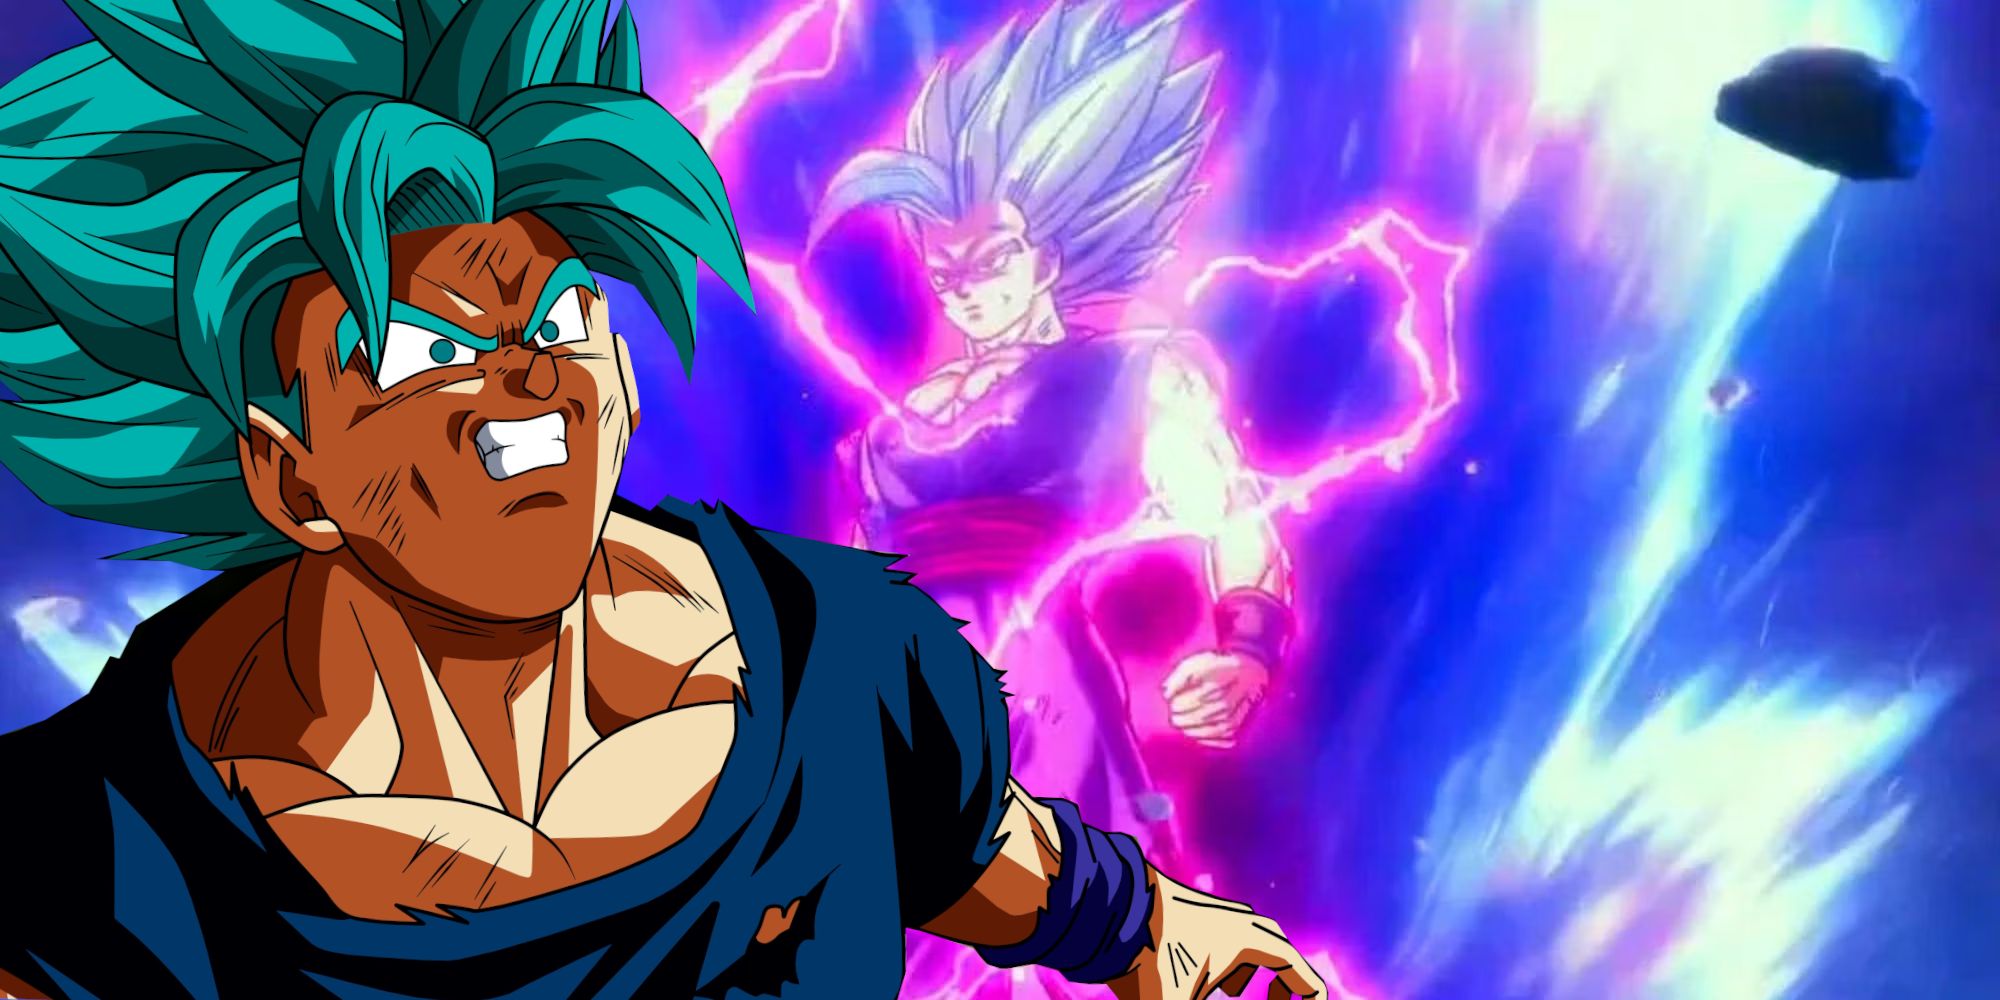 Image shows Beast Gohan transformed and surrounded by blue and purple auras while Super Saiyan Blue Goku looks up at him with an intimidated expression.